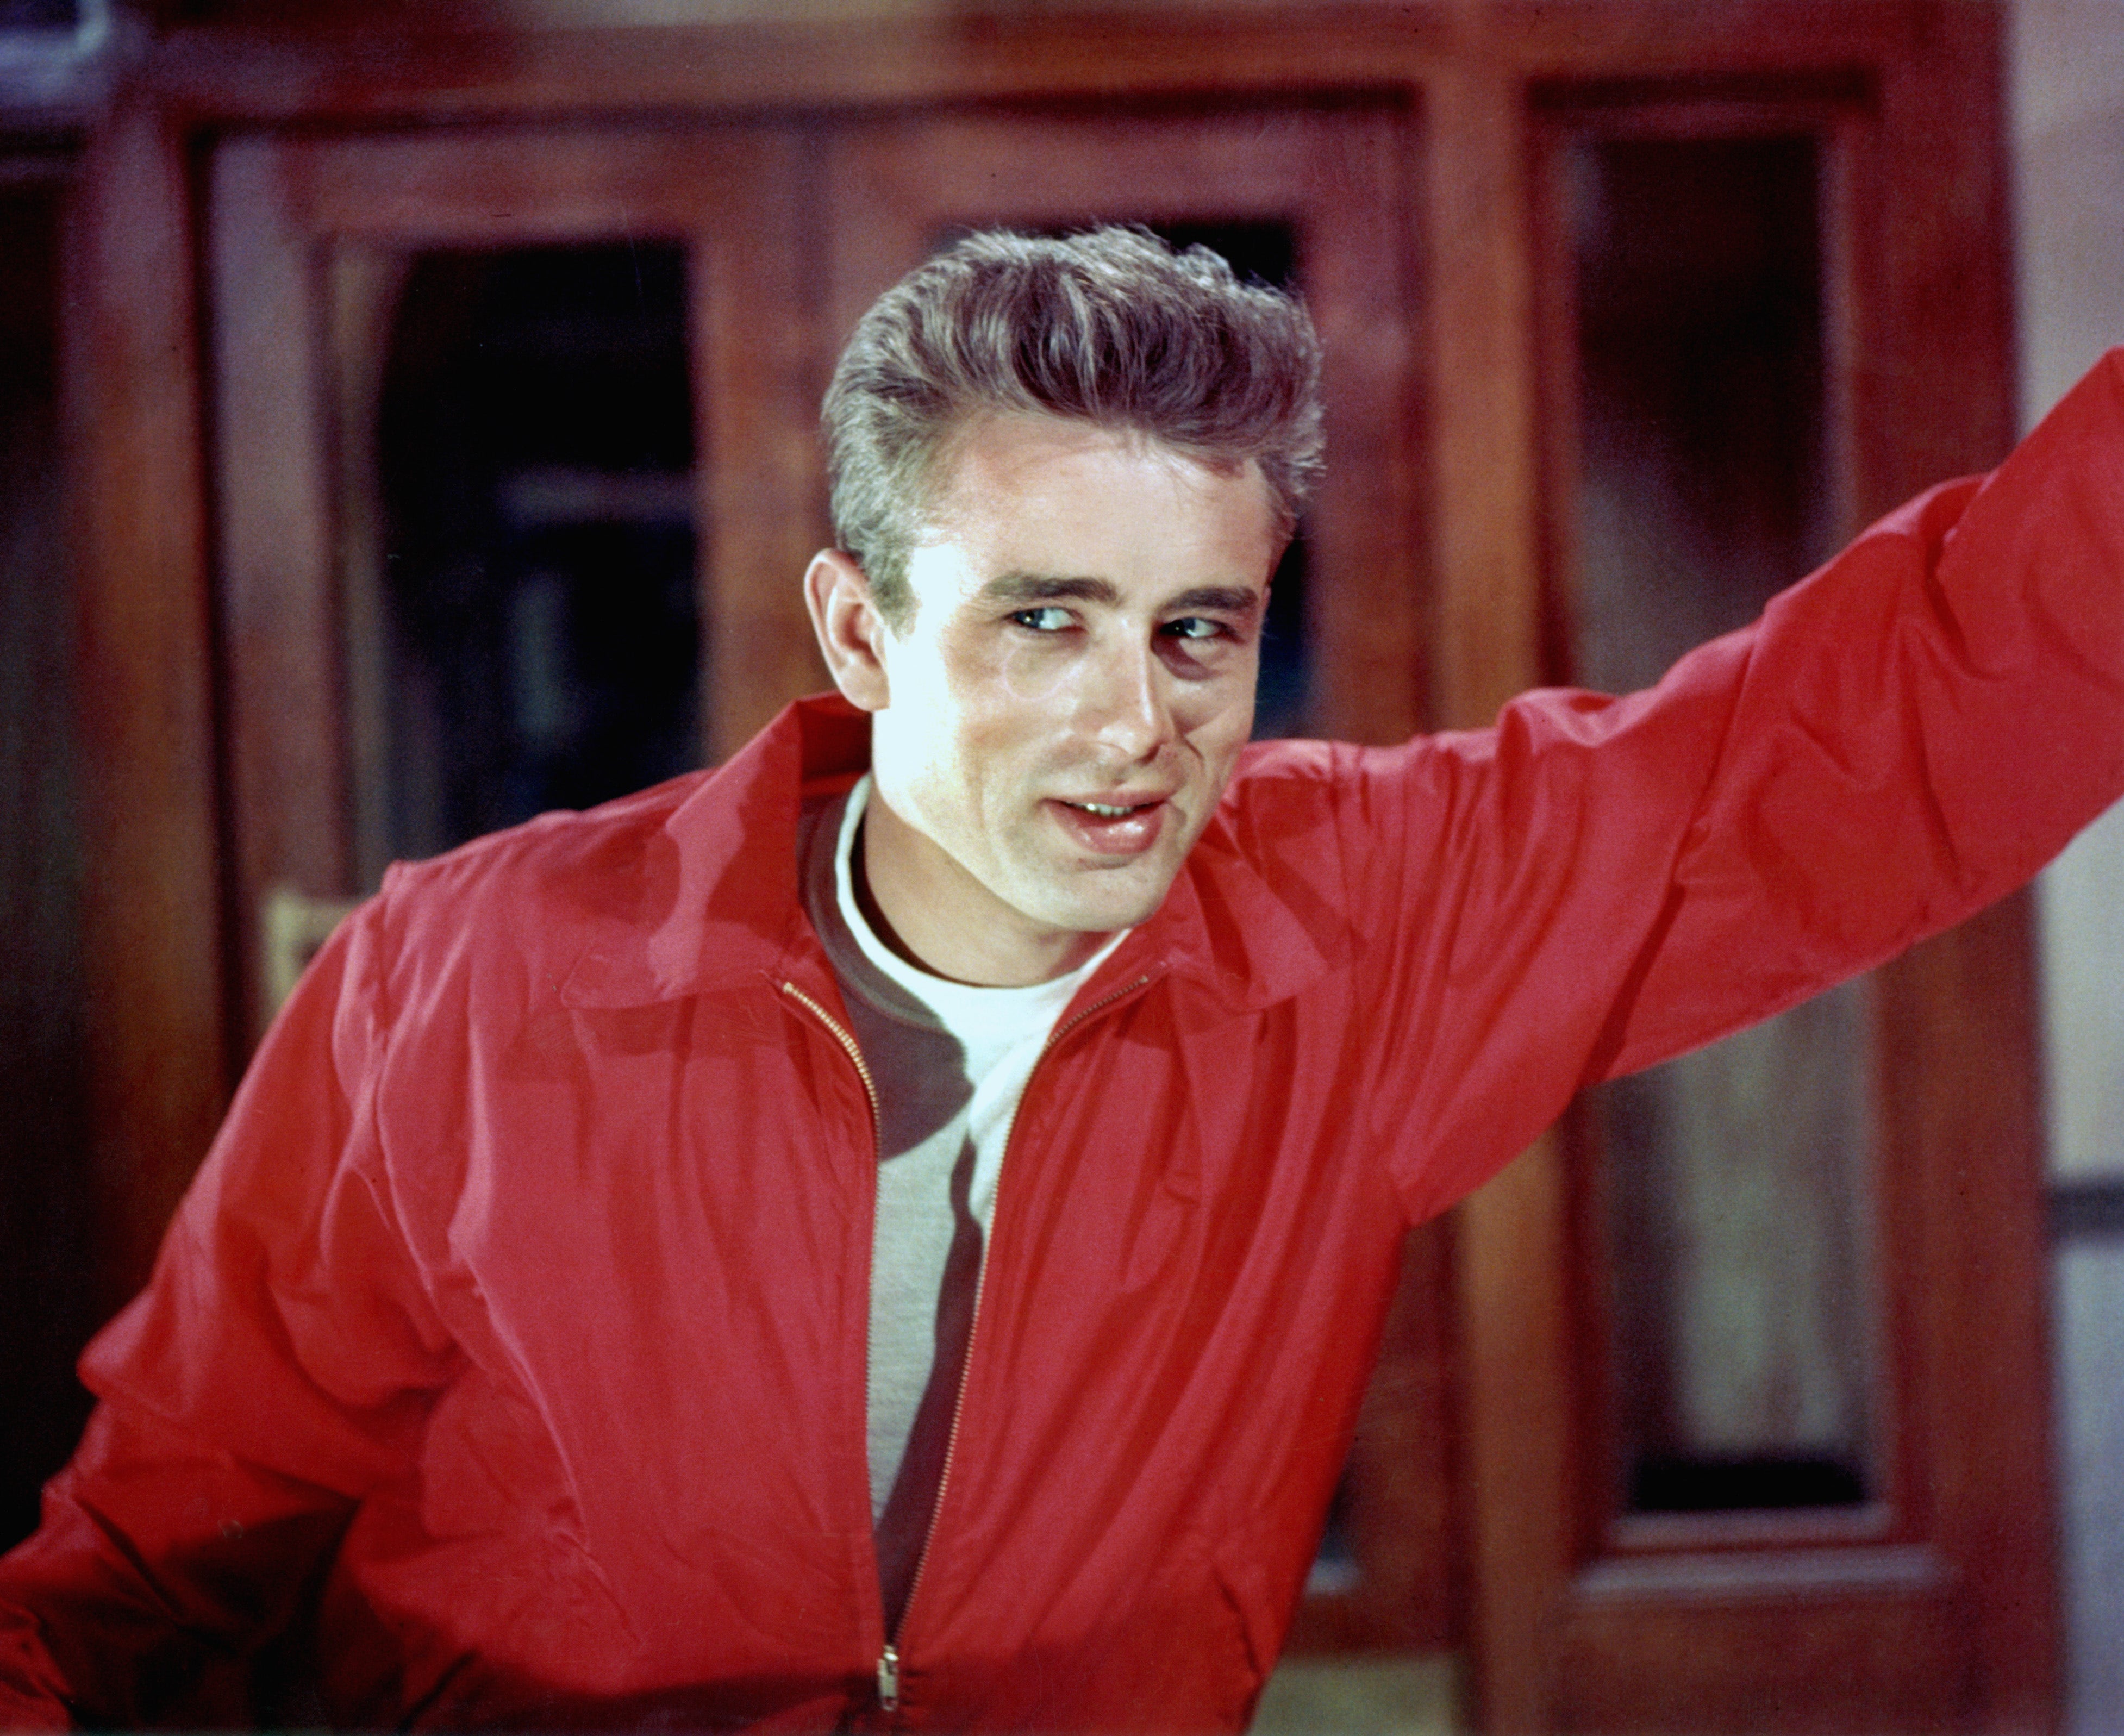 James Dean reportedly appearing in new film with AI, experts weigh in